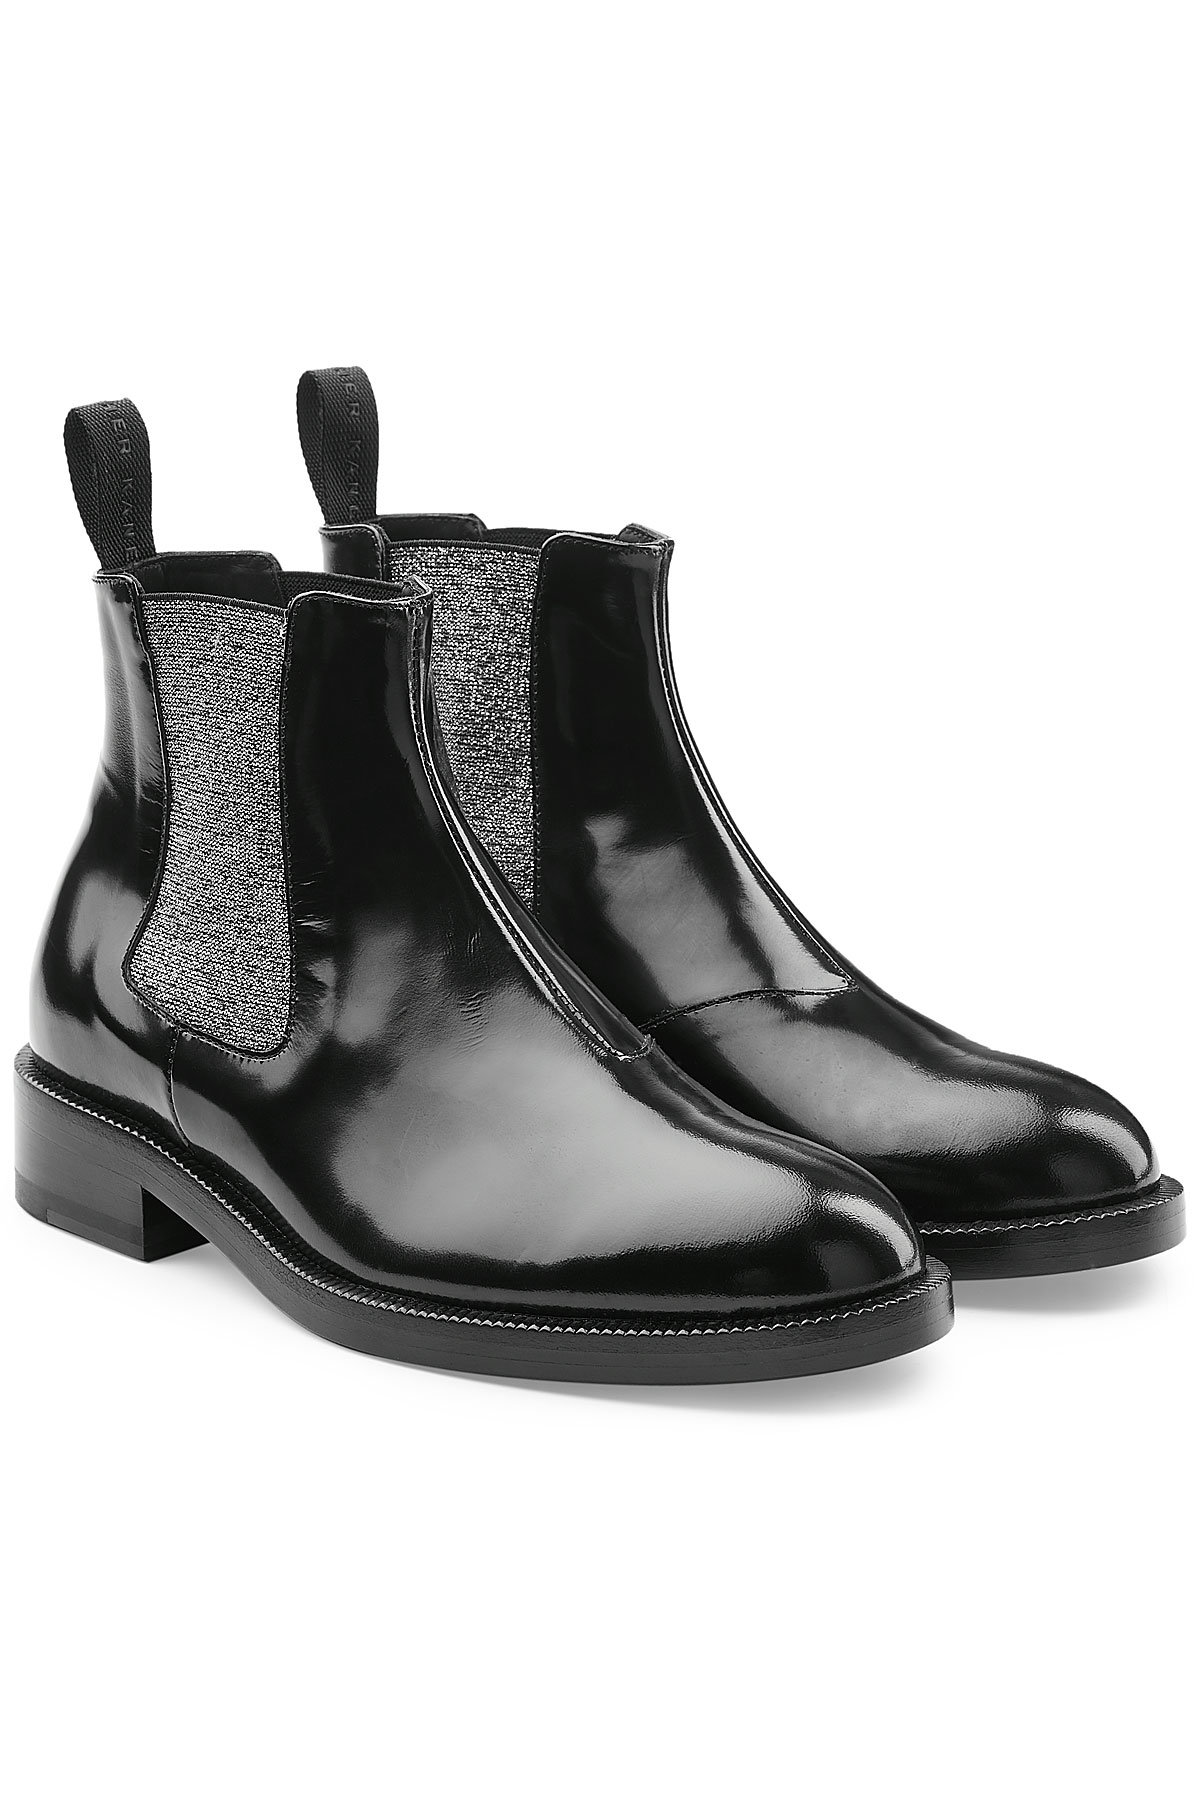 DNA Ankle Boots in Leather by Christopher Kane